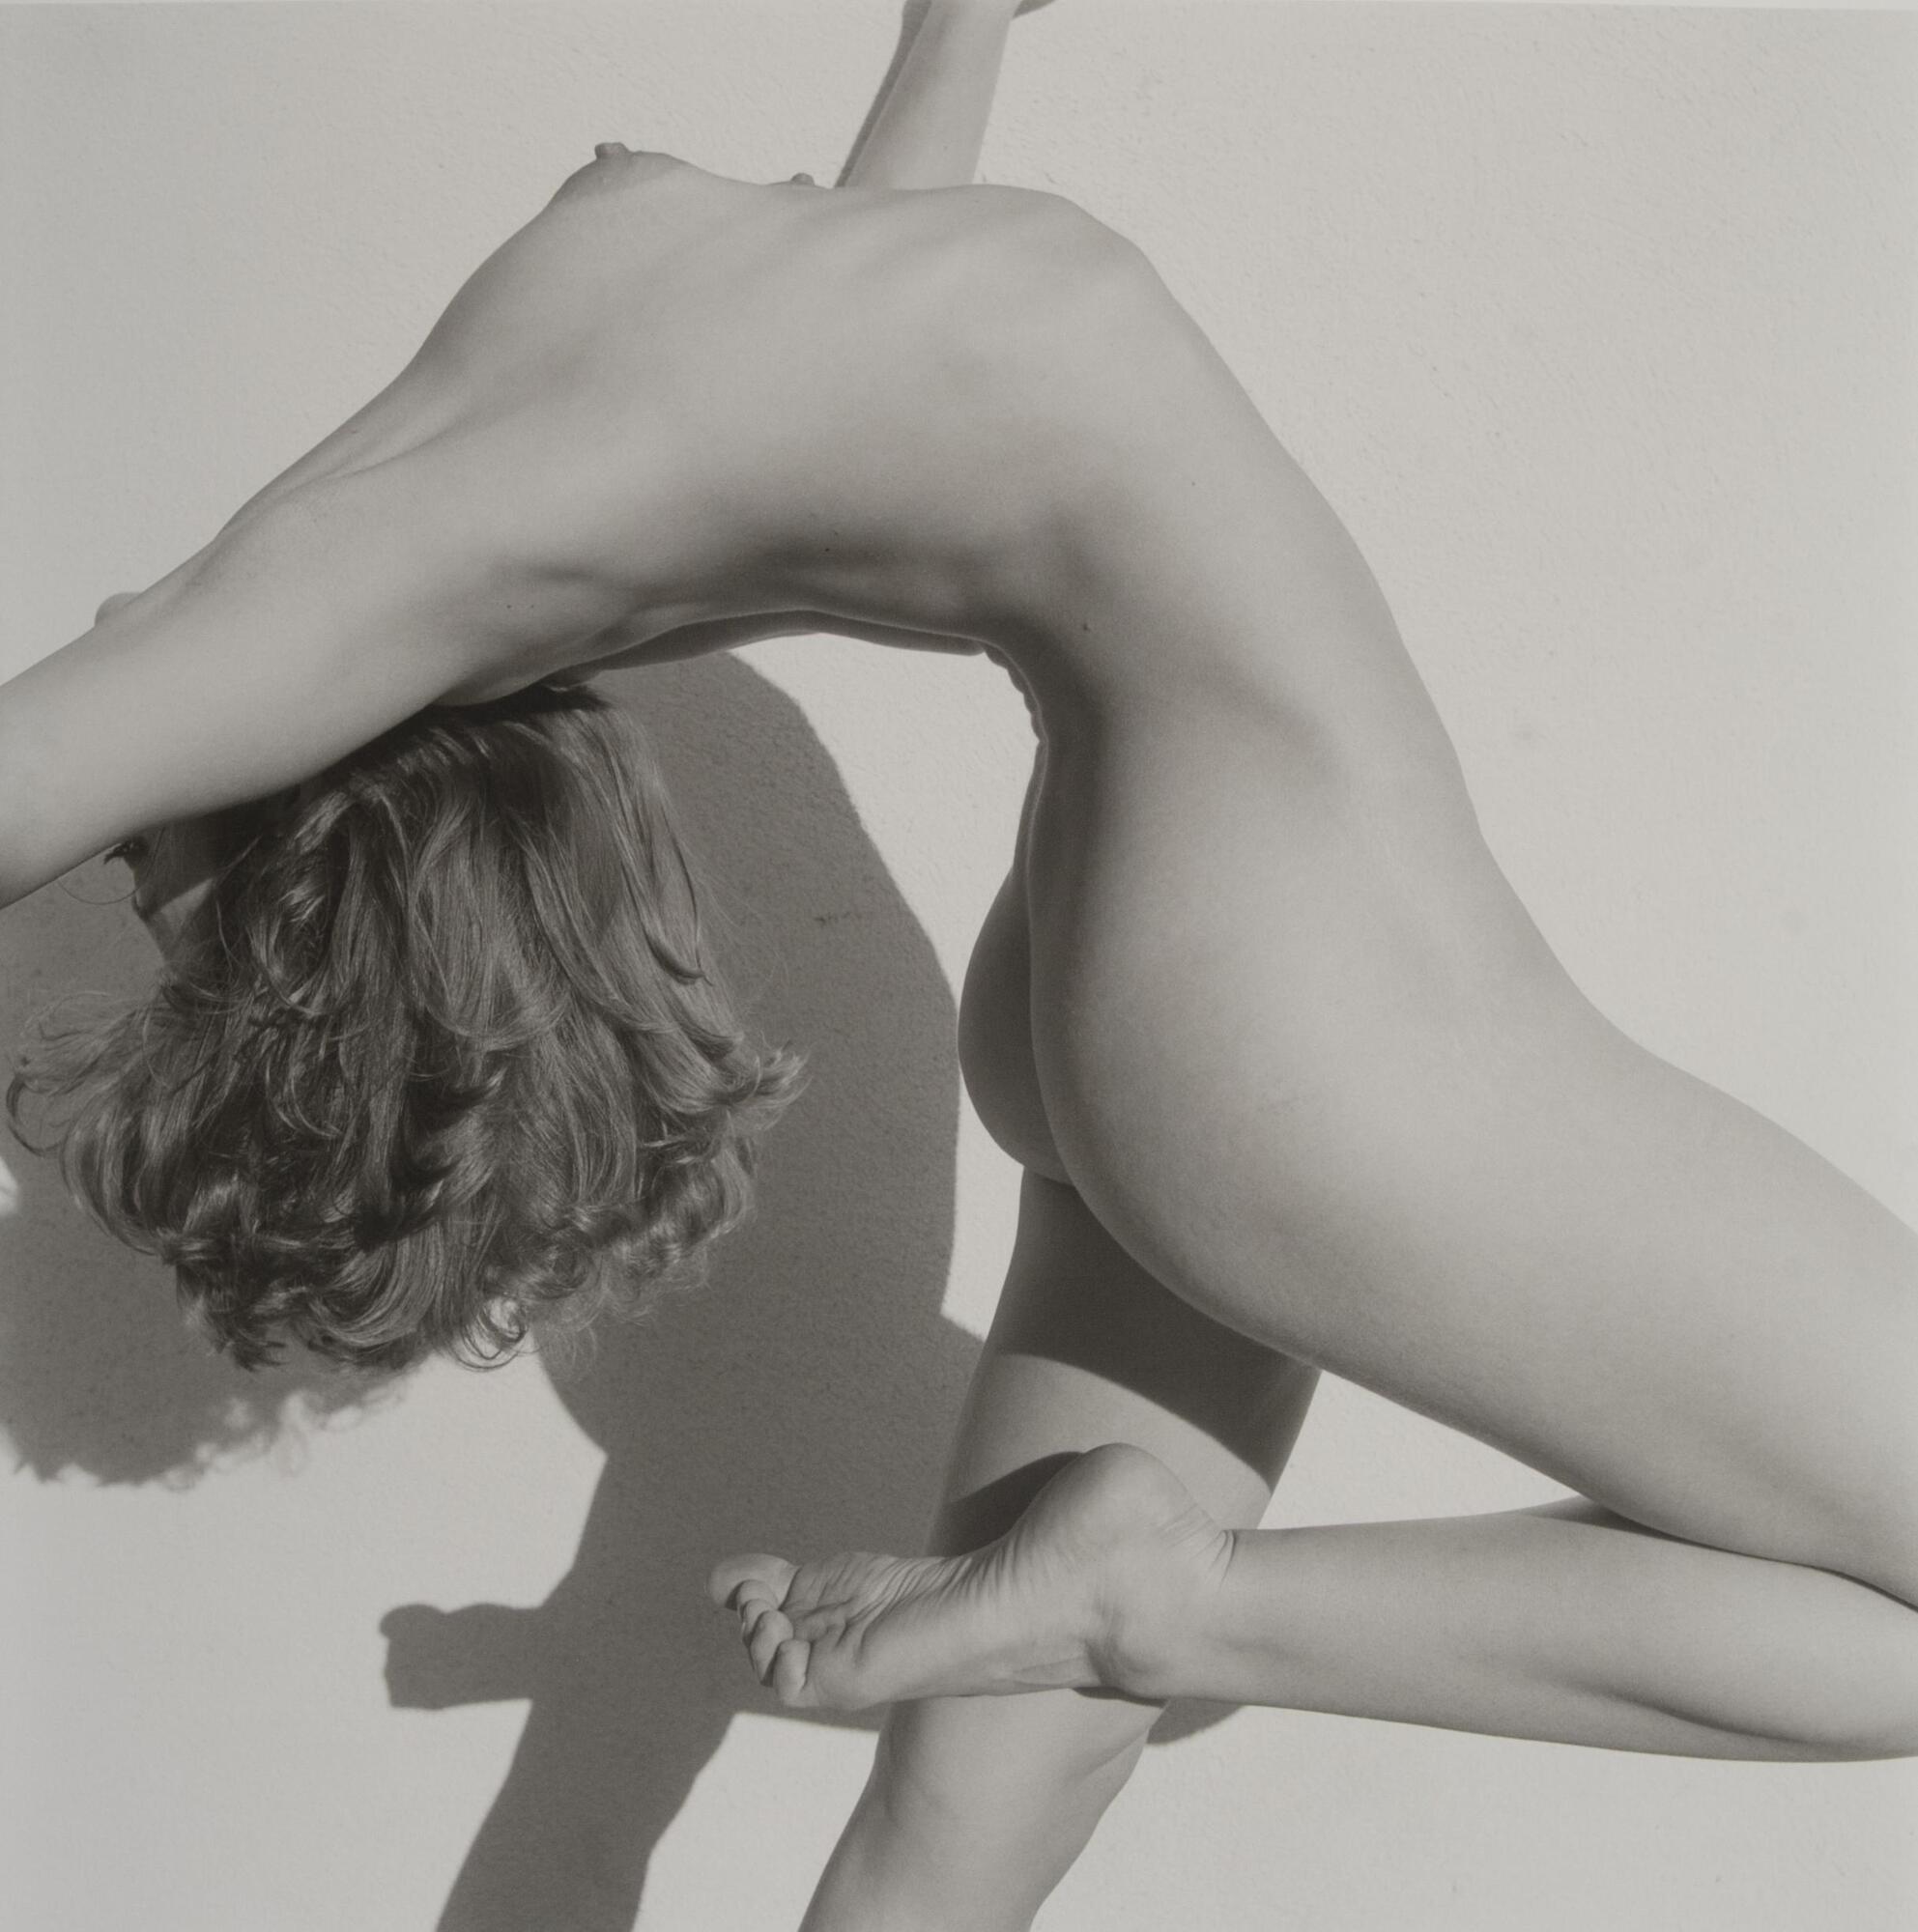 A nude in a dance pose. The female dancer is posed with an arched back and her arms extended, one knee is brought up as if in an exaggerated step motion. Her head is tilted back with her face covered and hair hanging down. A light source to her right casts a shadow of her body onto a white background.